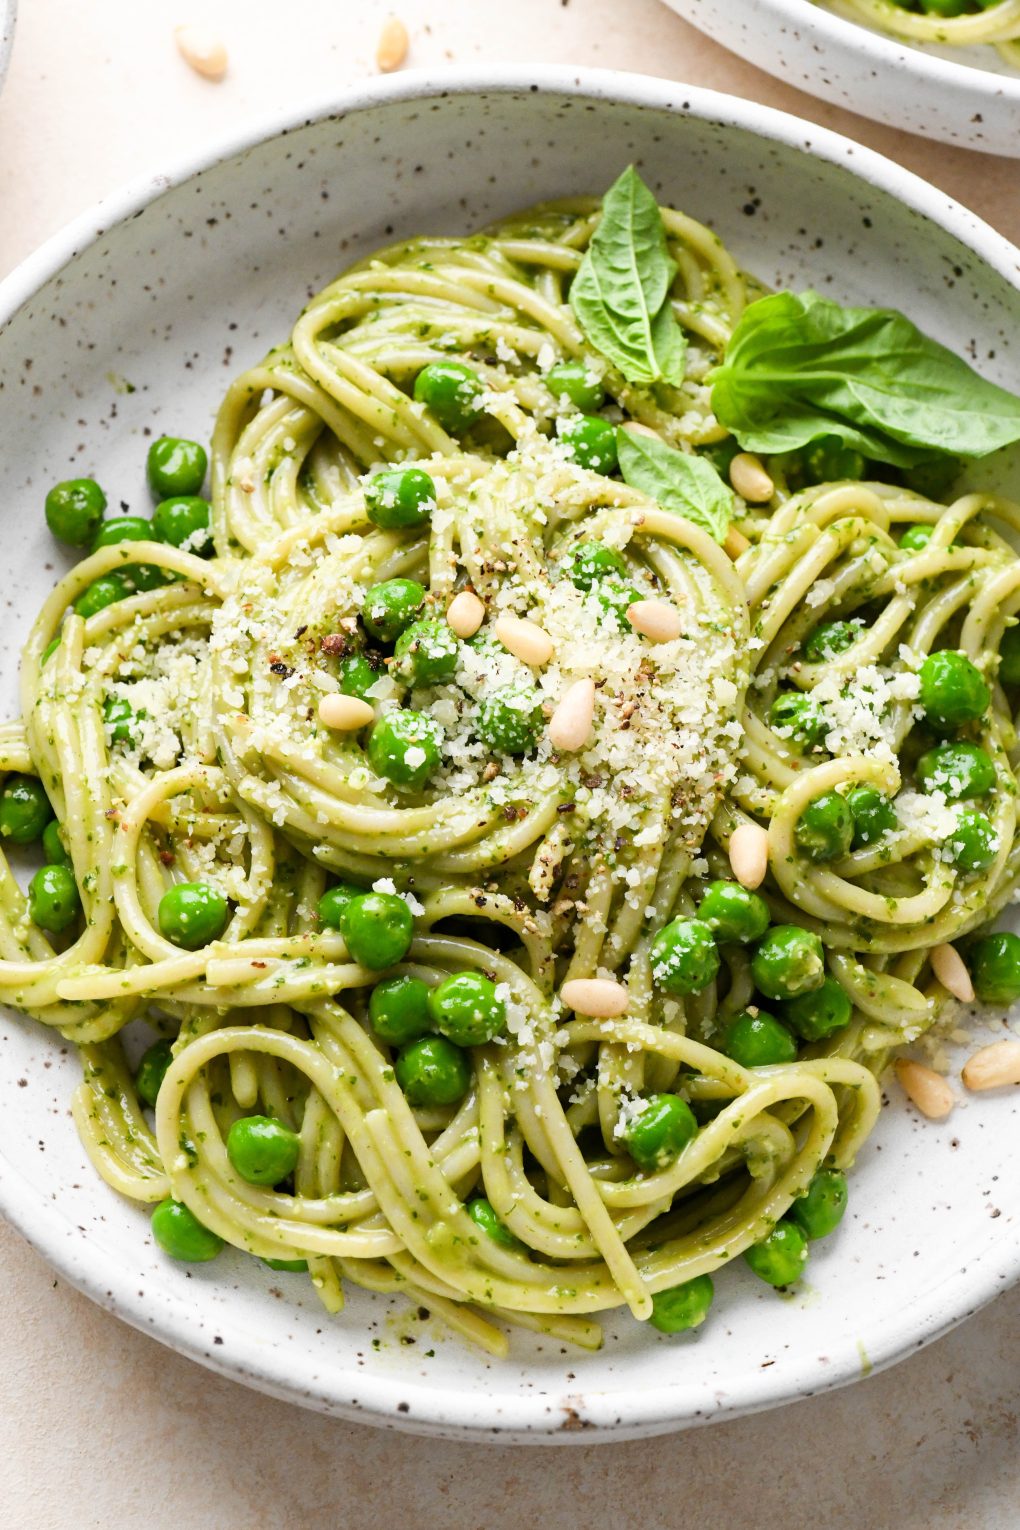 Pesto pasta made with spaghetti twirled in a speckled ceramic bowl and topped with pine nuts and grated parmesan.